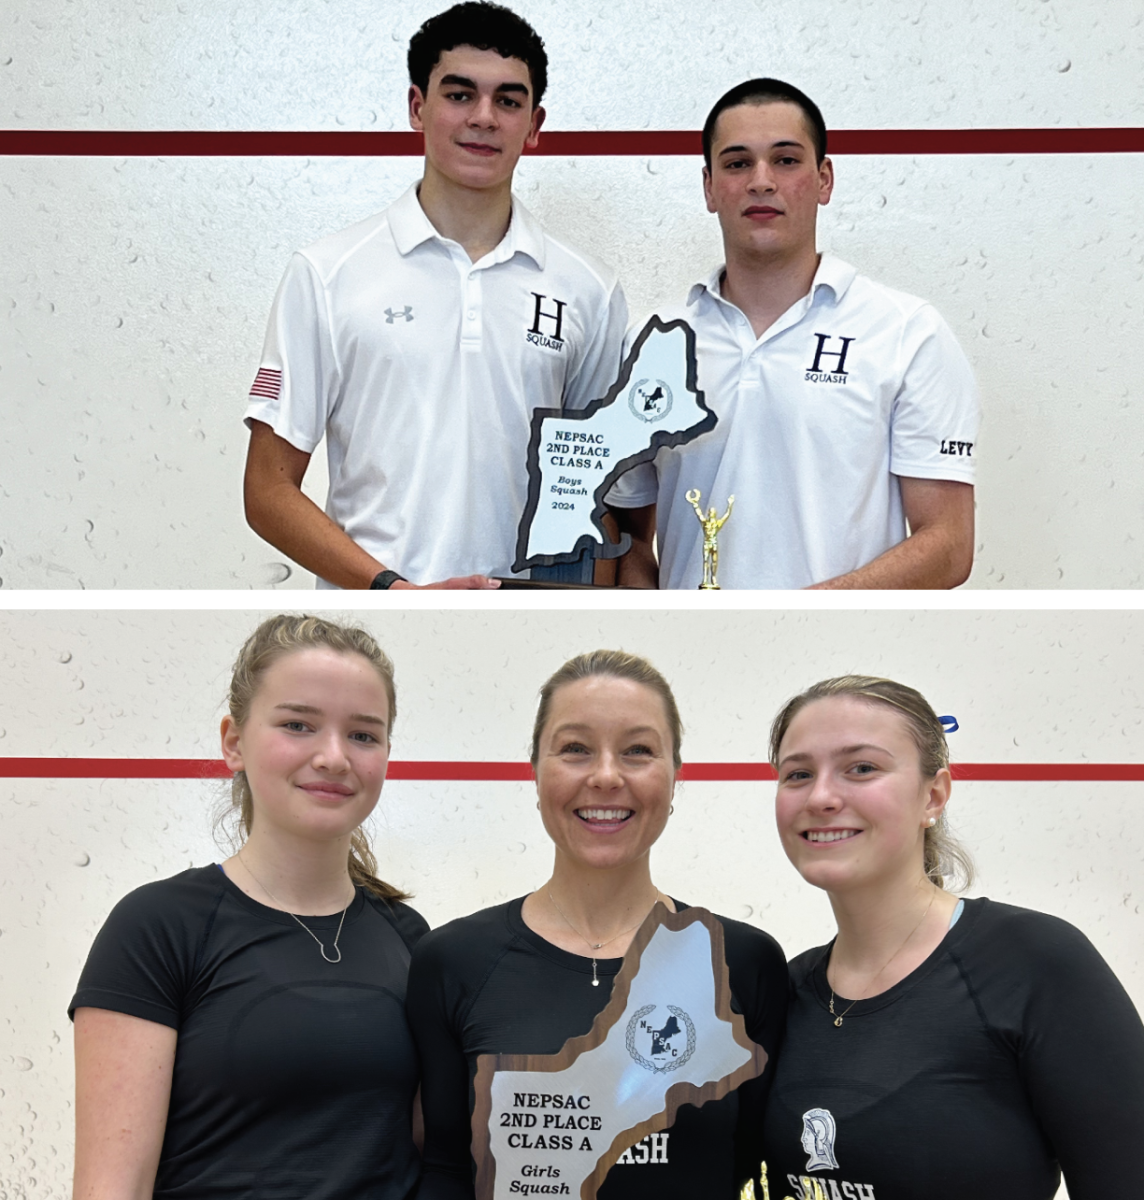 Boys+and+Girls+Varsity+Squash+both+earned+2nd+place+honors+at+the+New+England+Class+A+Championships.